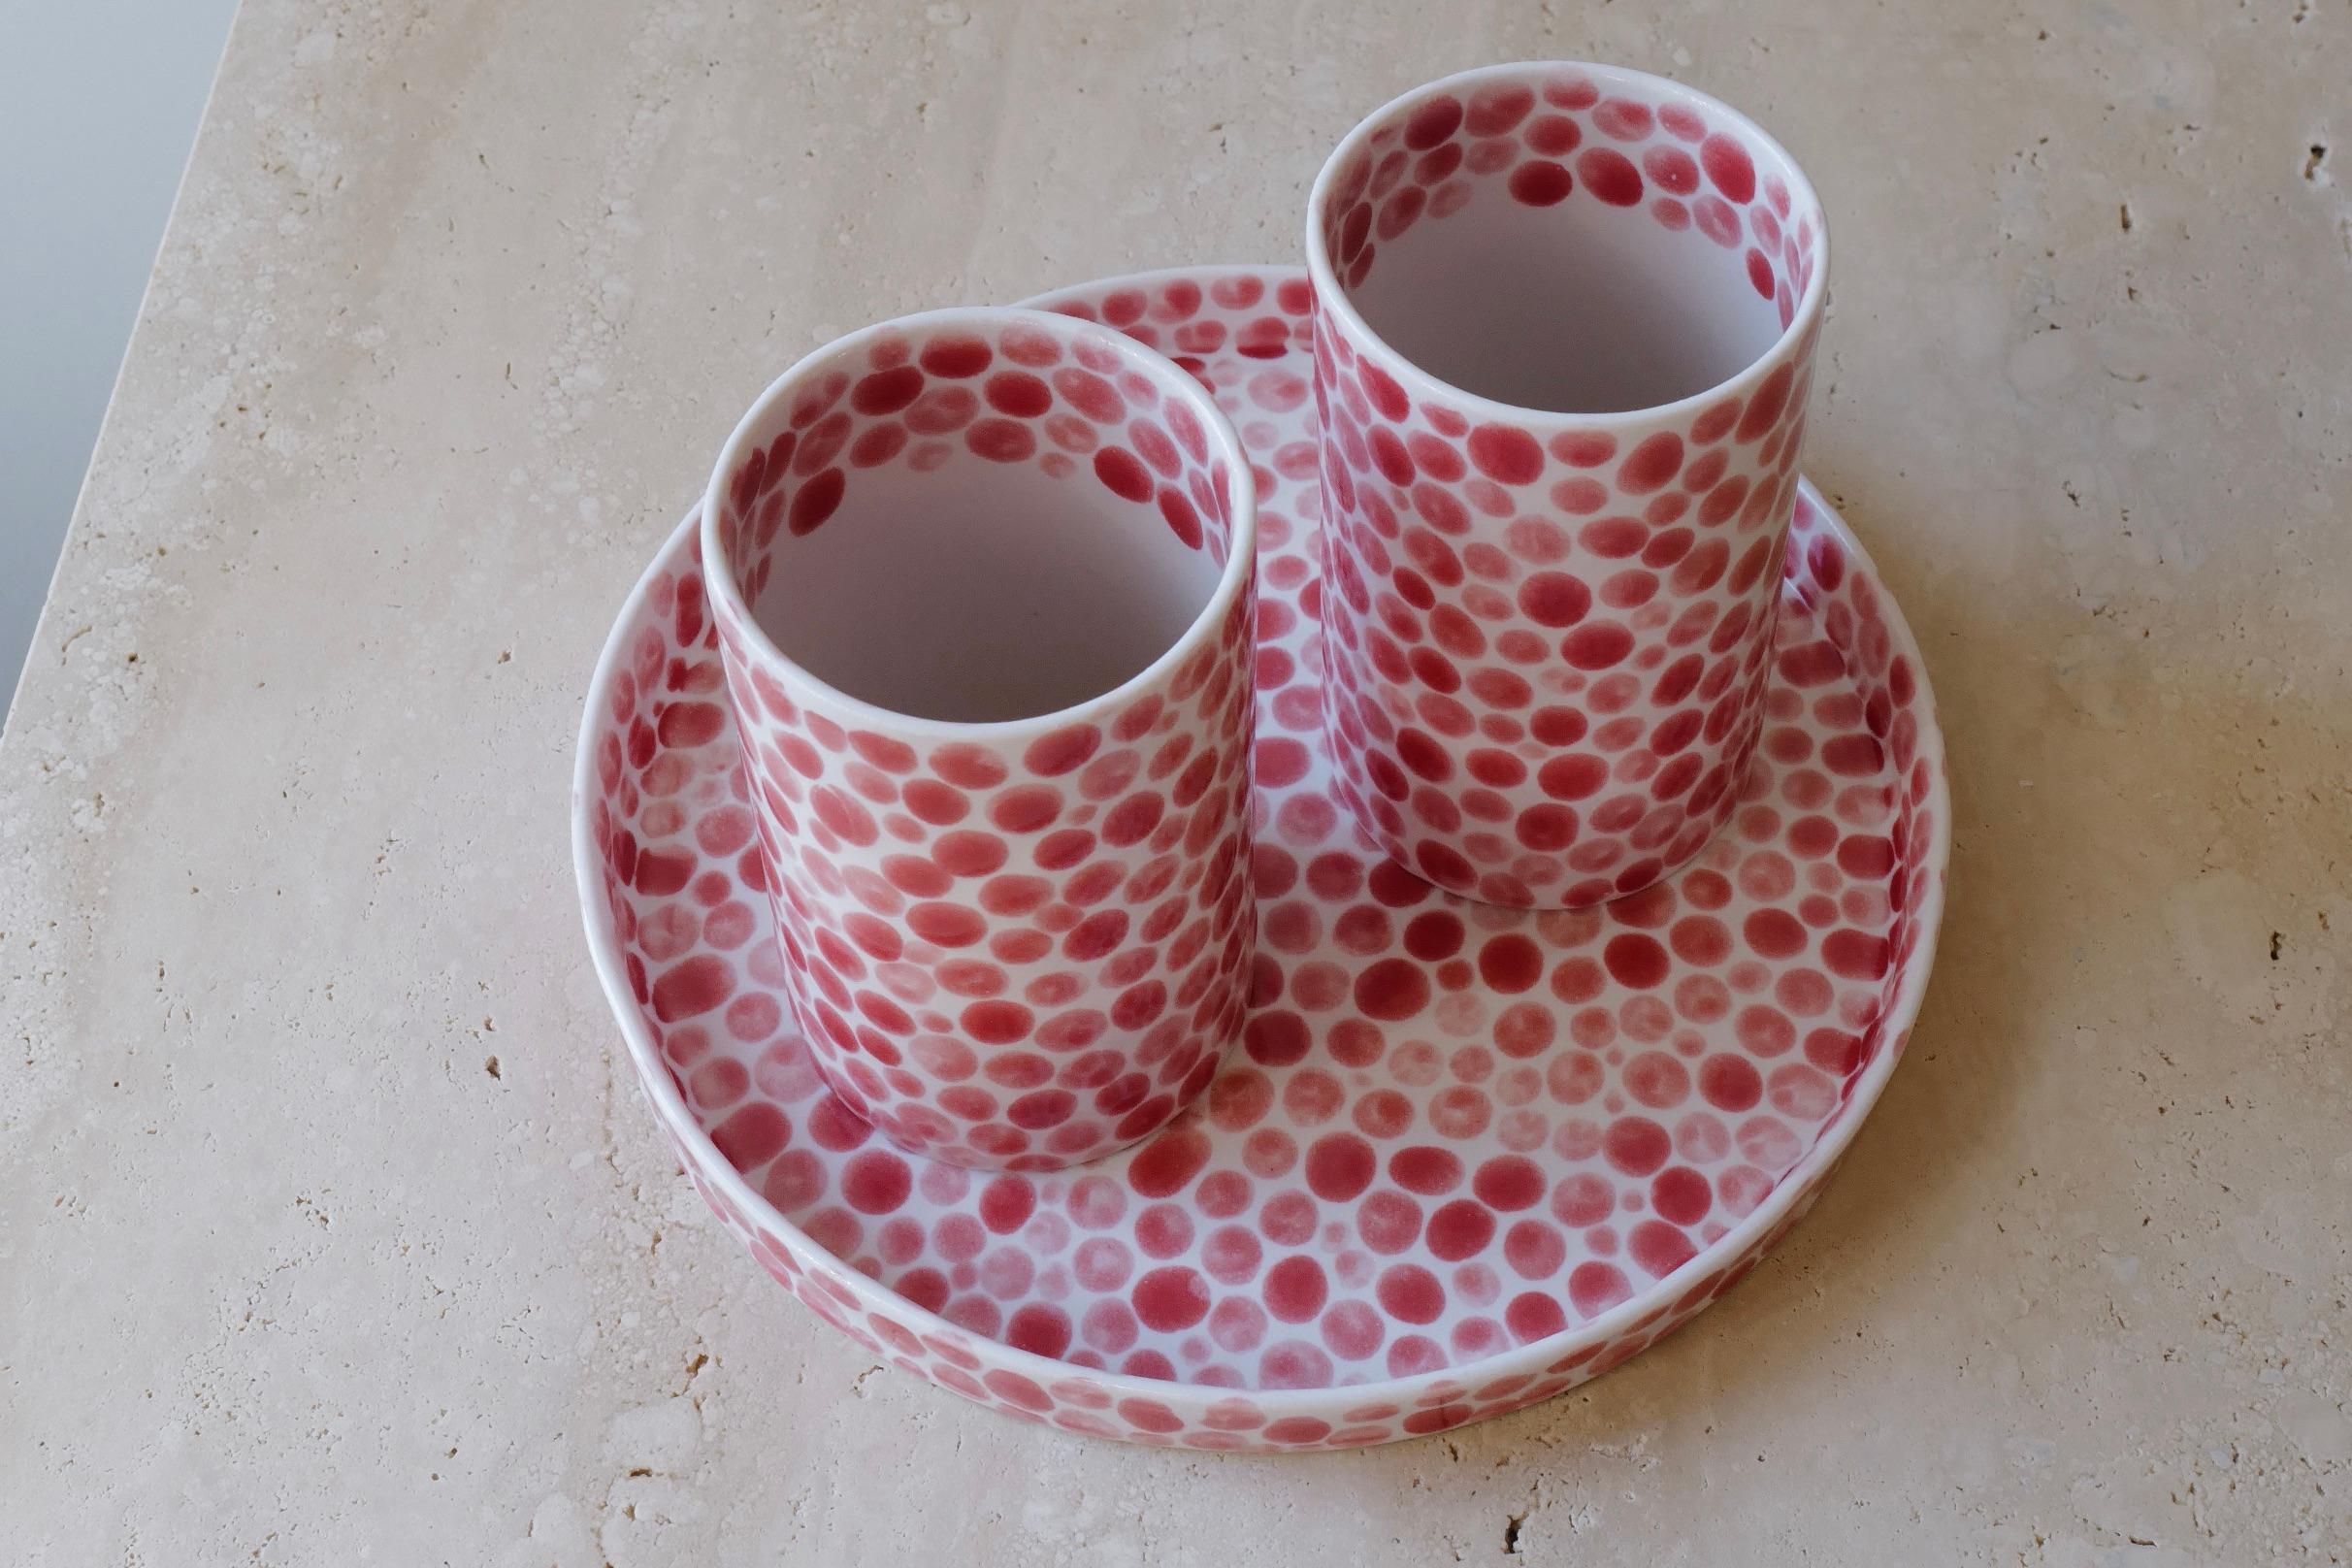 Ceramic Red Dots Porcelain Tall Cup by Lana Kova